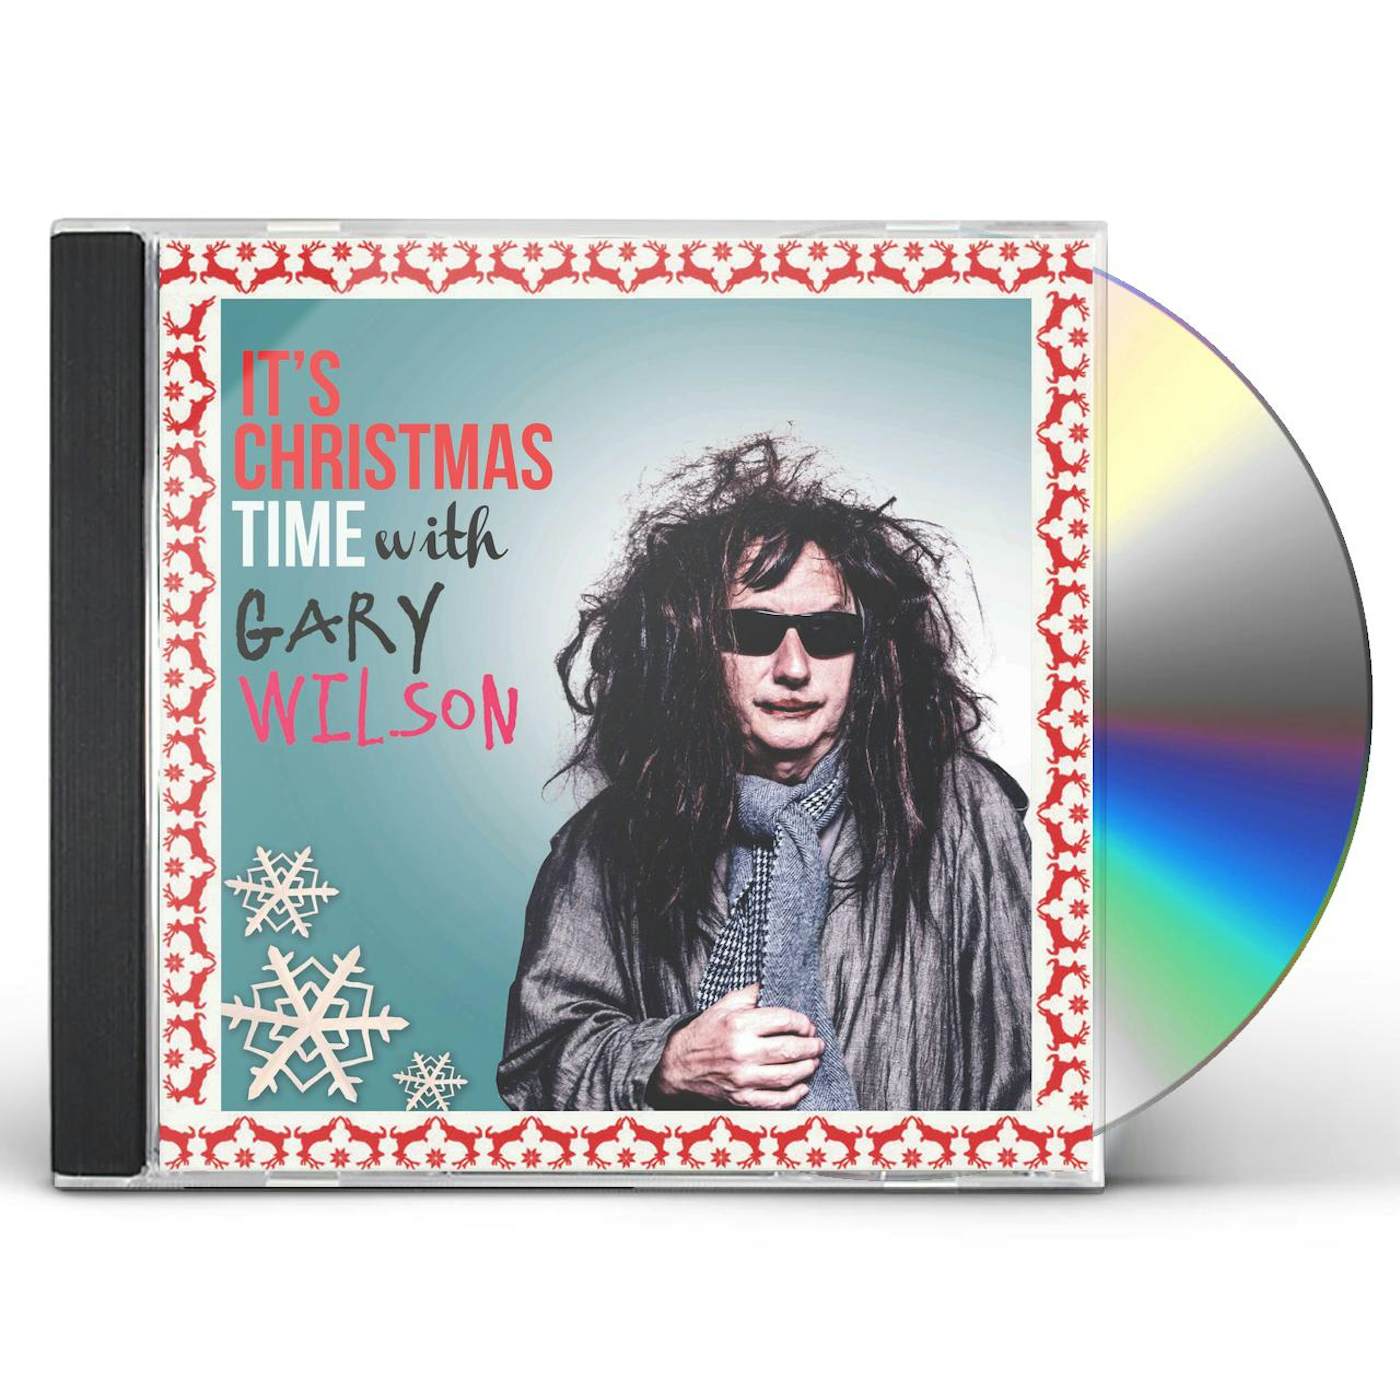 IT'S CHRISTMAS TIME WITH GARY WILSON CD